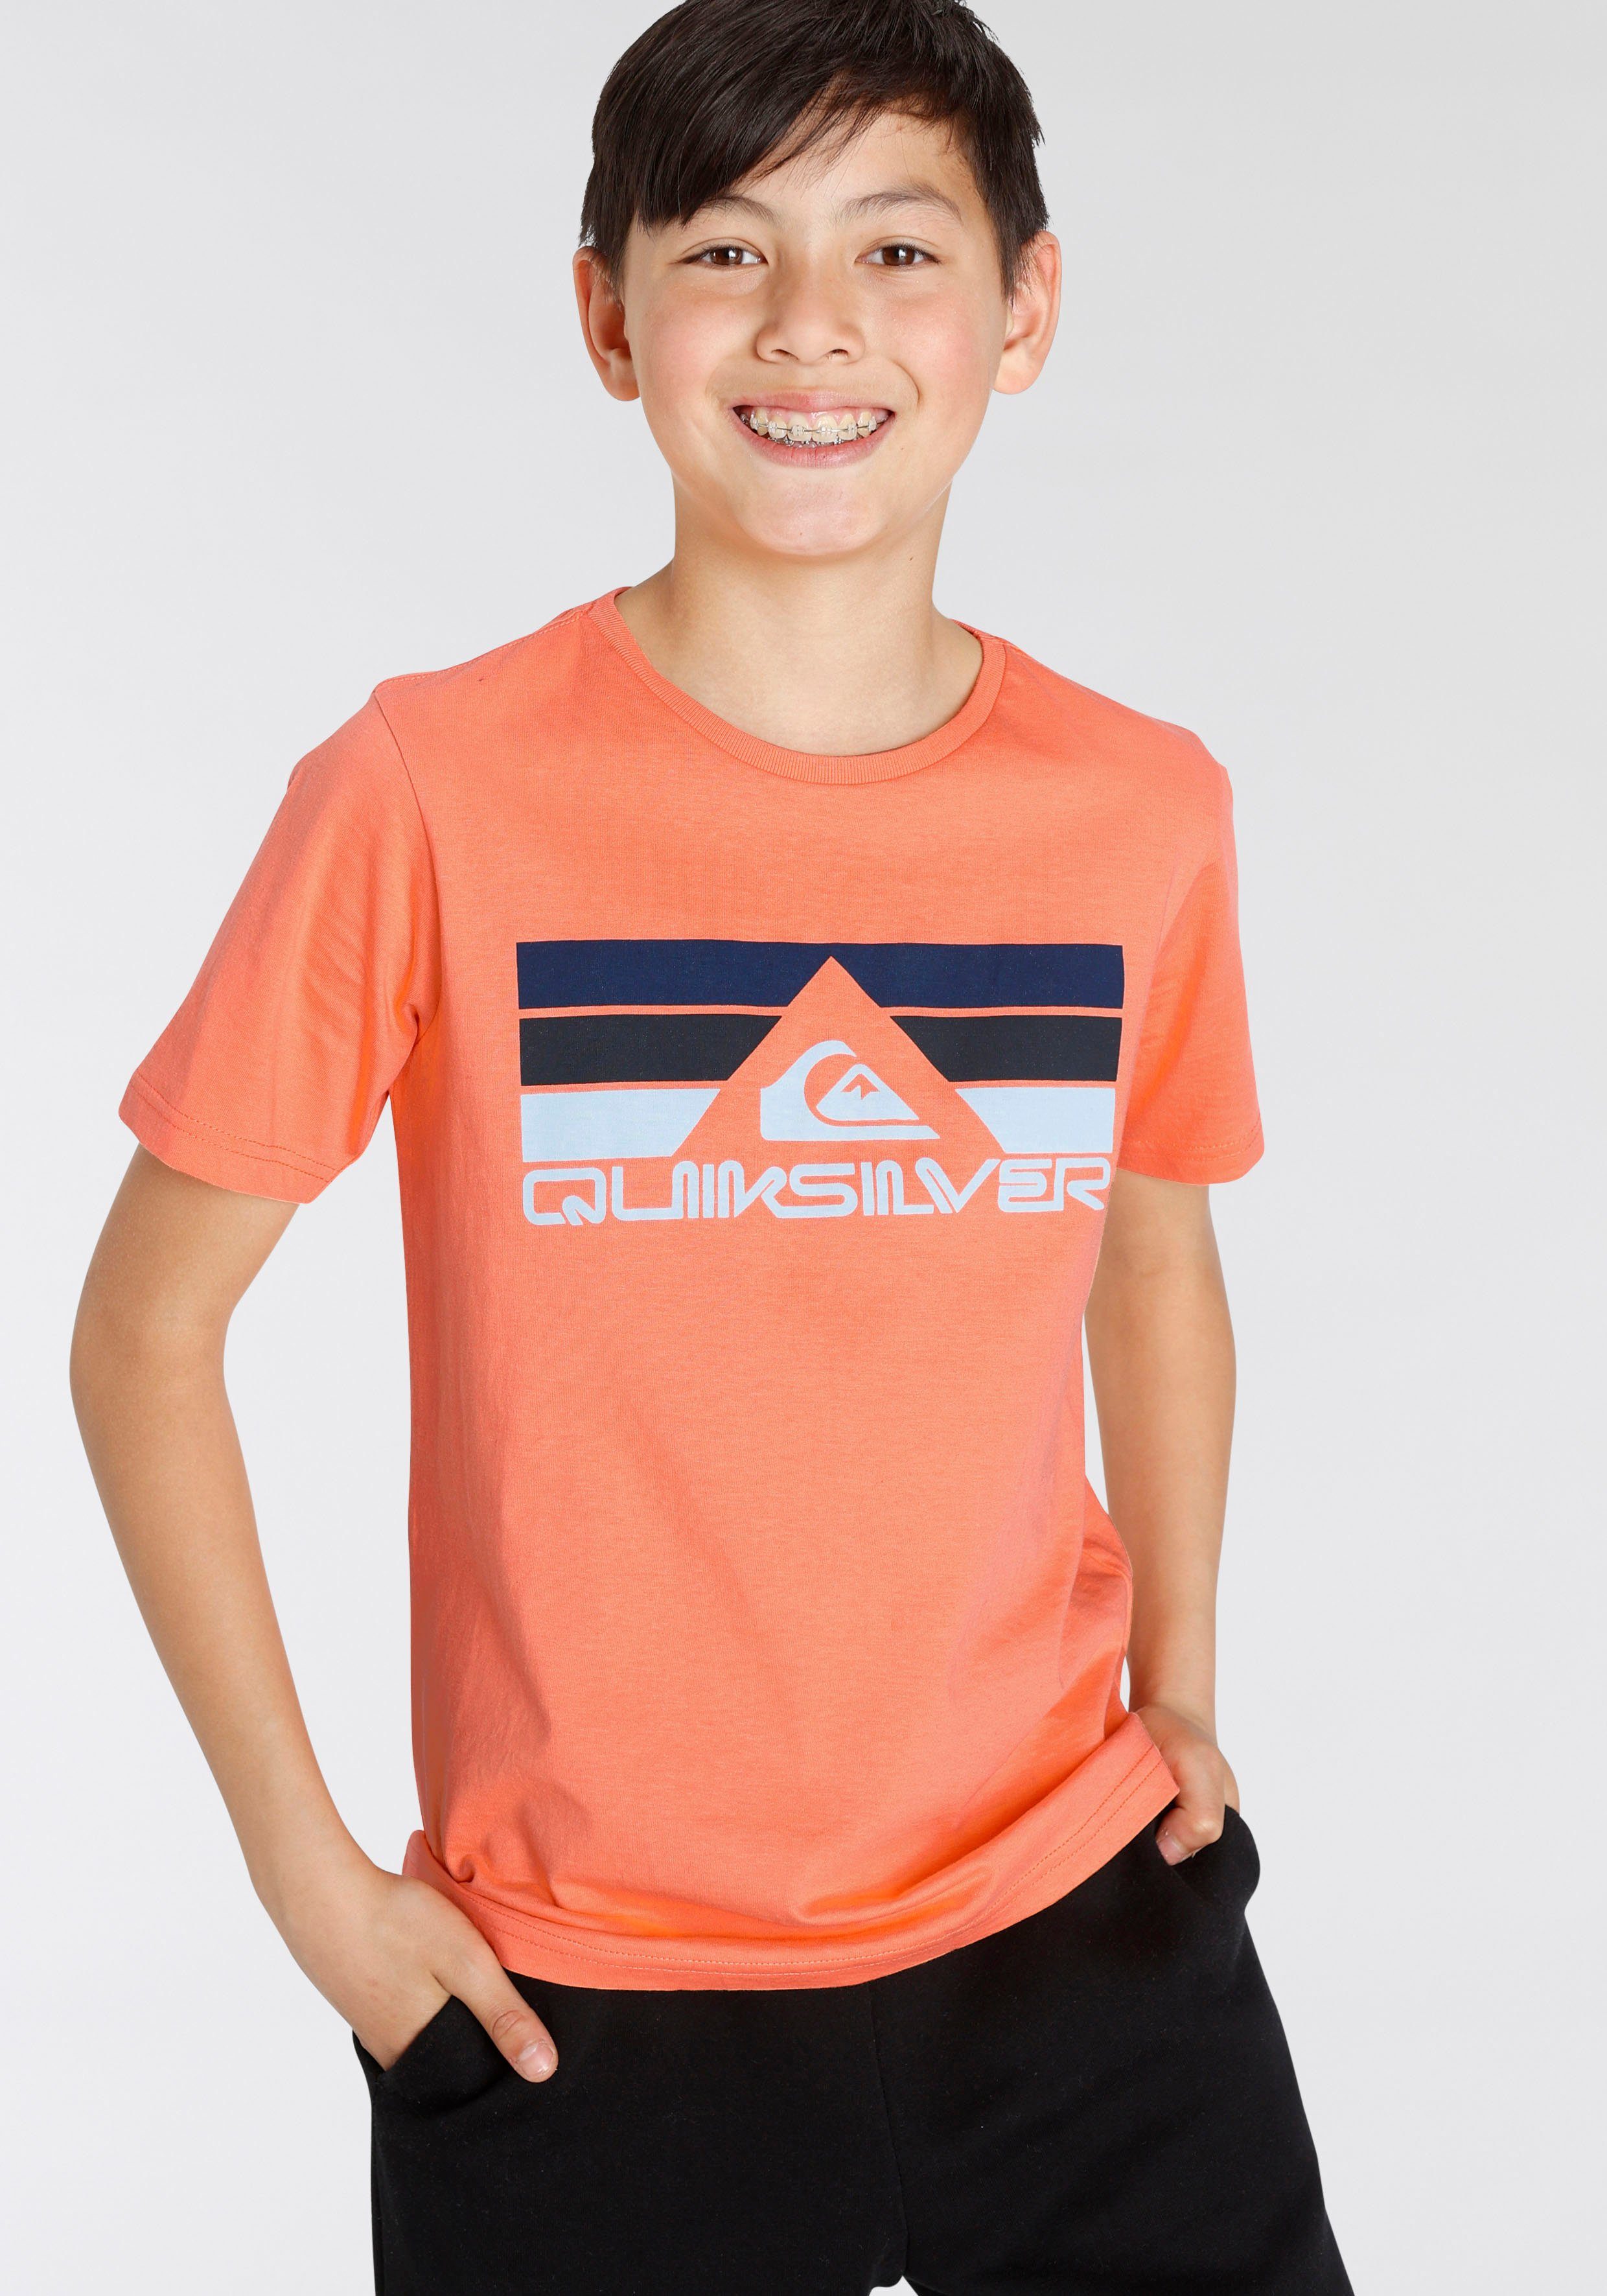 Quiksilver T-Shirt ROCKY PACK YOUTH Kinder für TEE CAB - SLEEVE SHORT